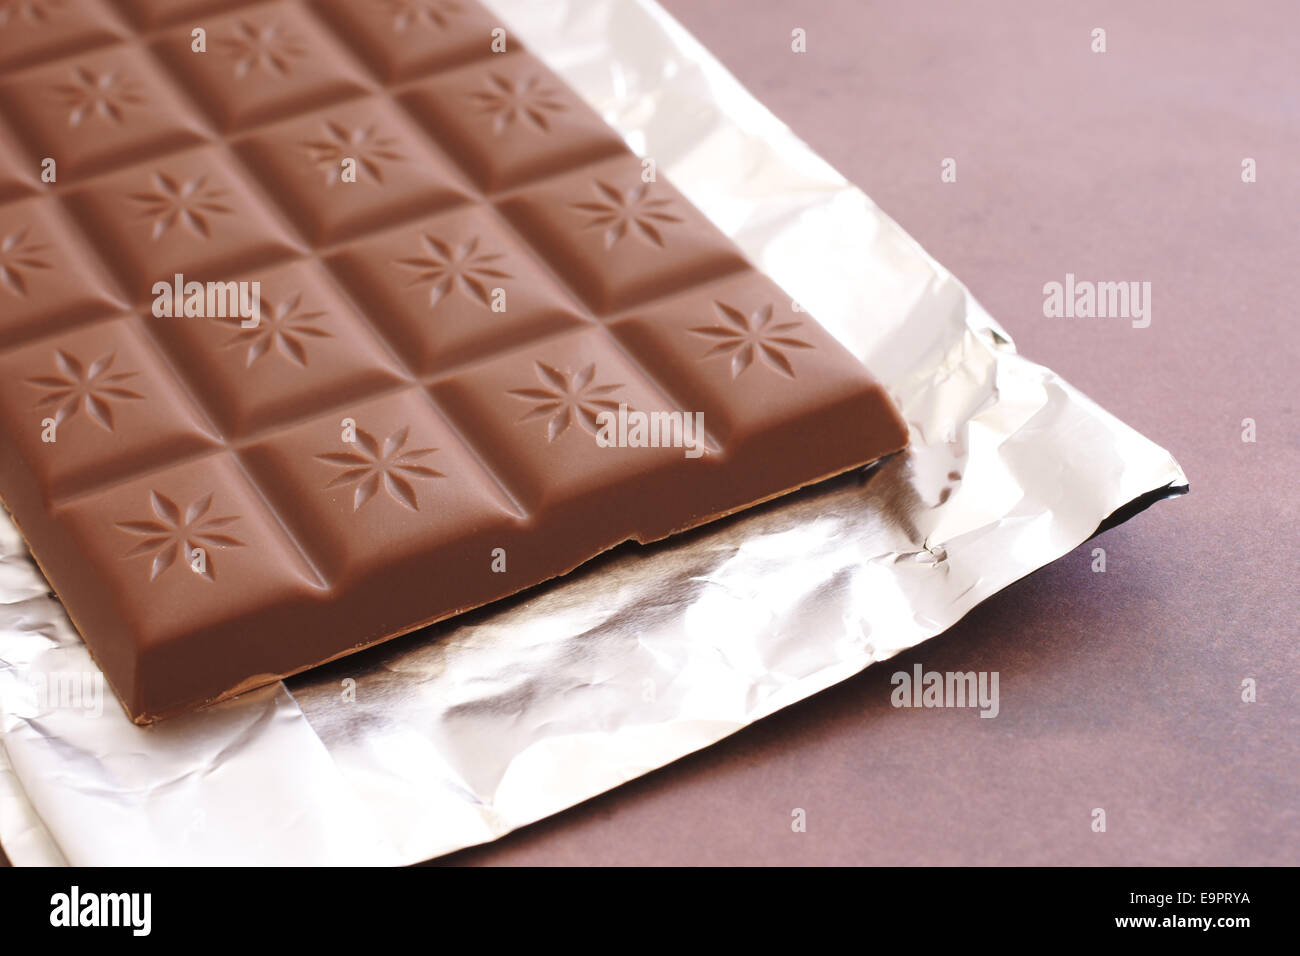 Bar of milk chocolate on a foil wrapper Stock Photo